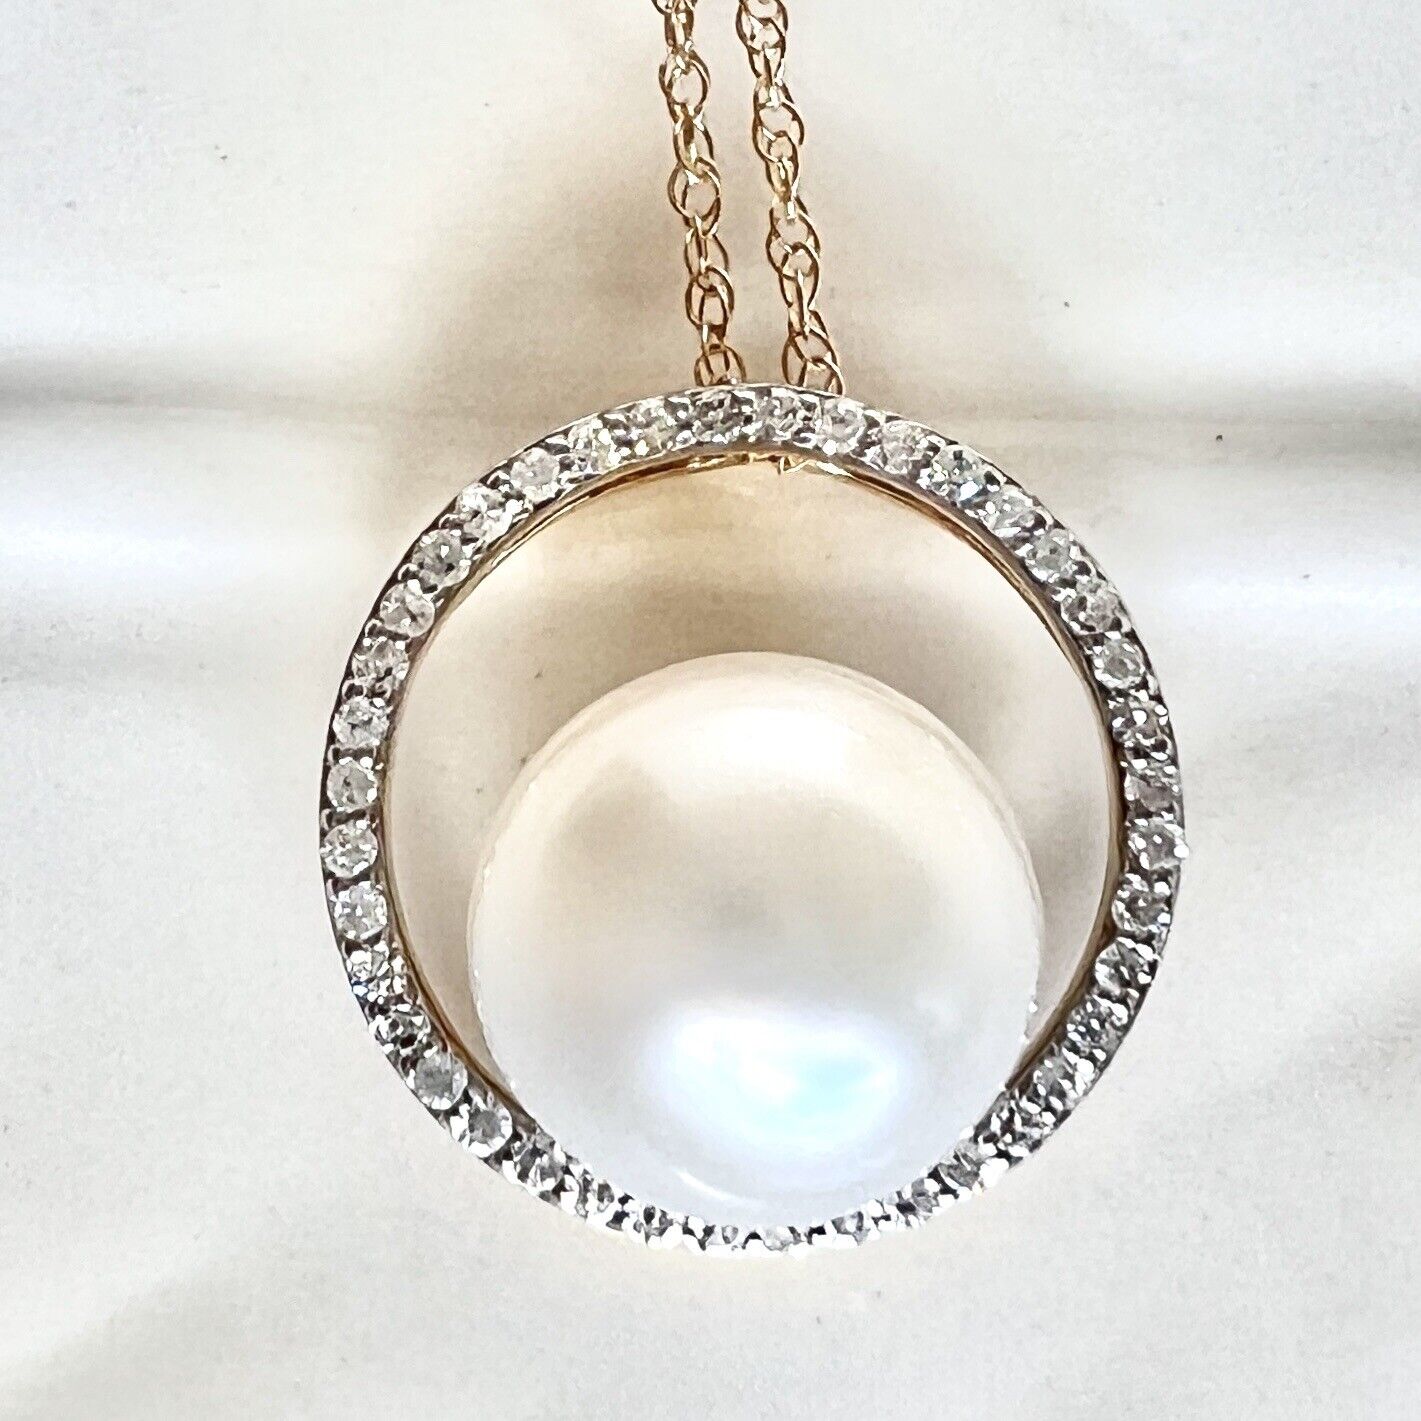 Solid 14k Yellow Gold Genuine Pearl and Diamond Circle Pendant Necklace, New 18”